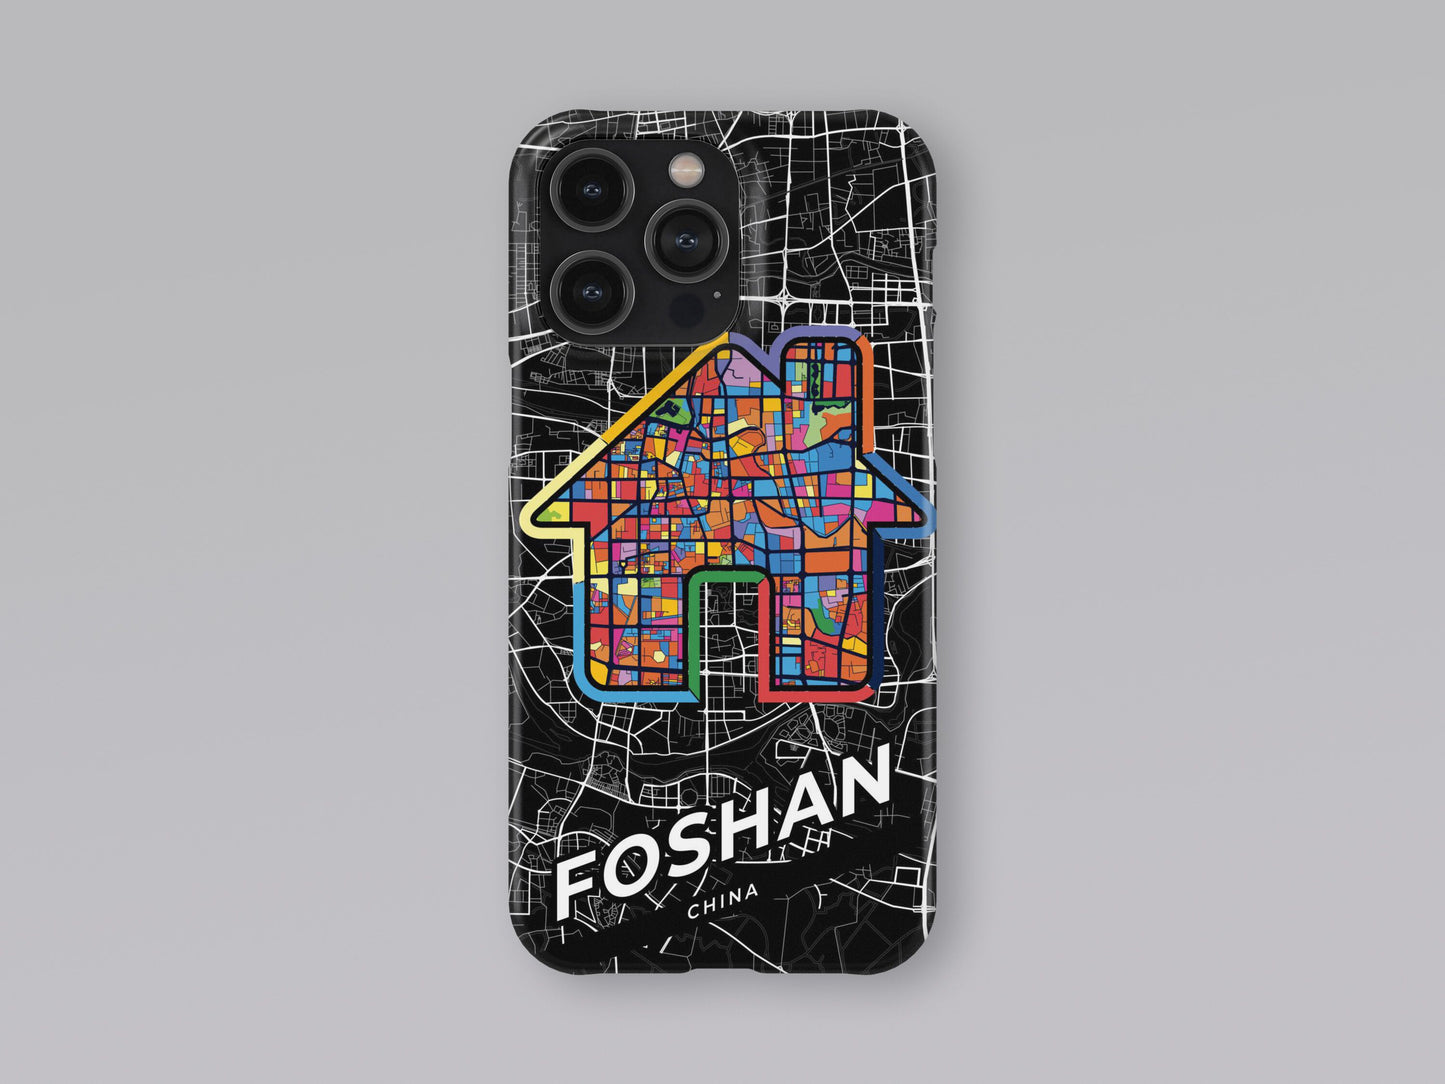 Foshan China slim phone case with colorful icon. Birthday, wedding or housewarming gift. Couple match cases. 3